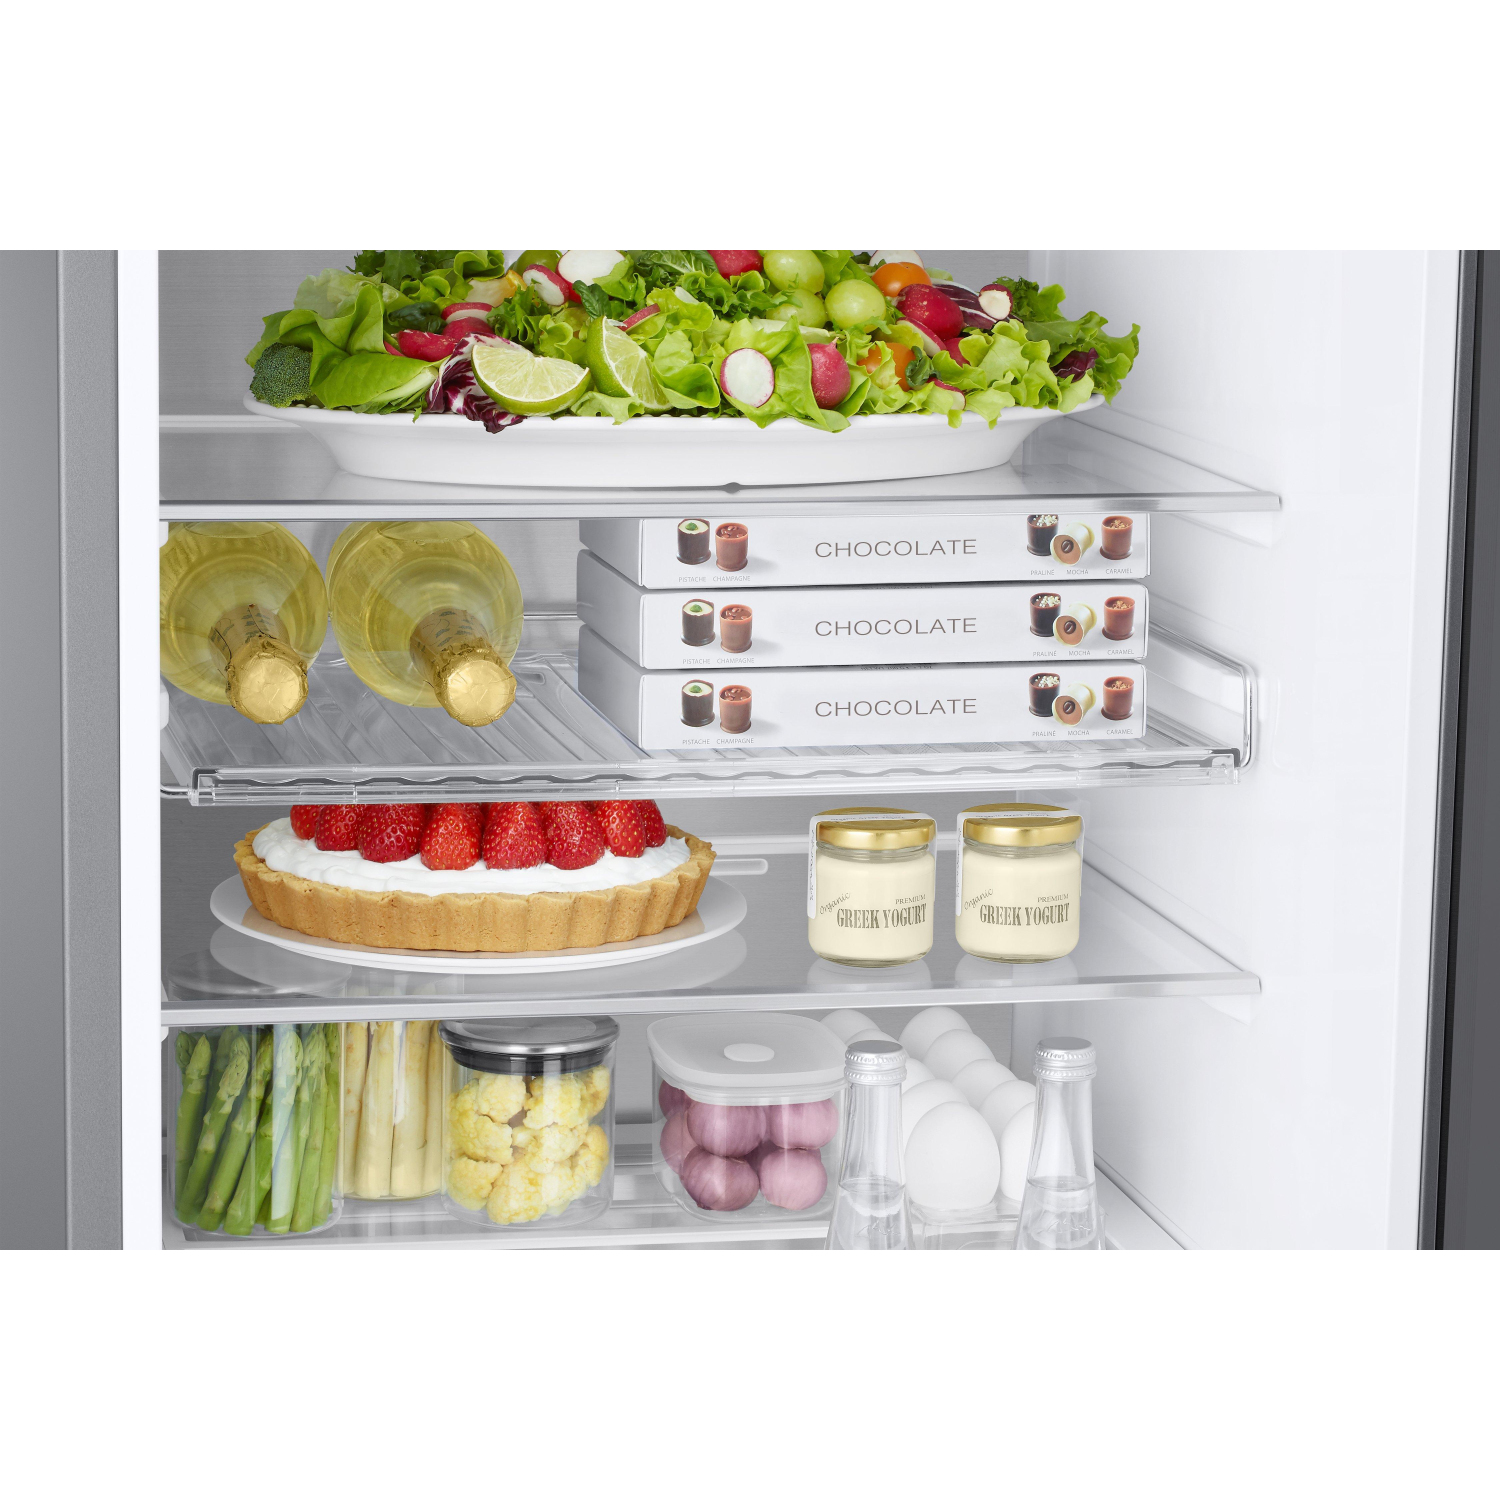 Samsung RL38A776ASR/EU 59.5cm 70/30 Frost Free Fridge Freezer  with Twin Cooling Plus - Real Steel - 1